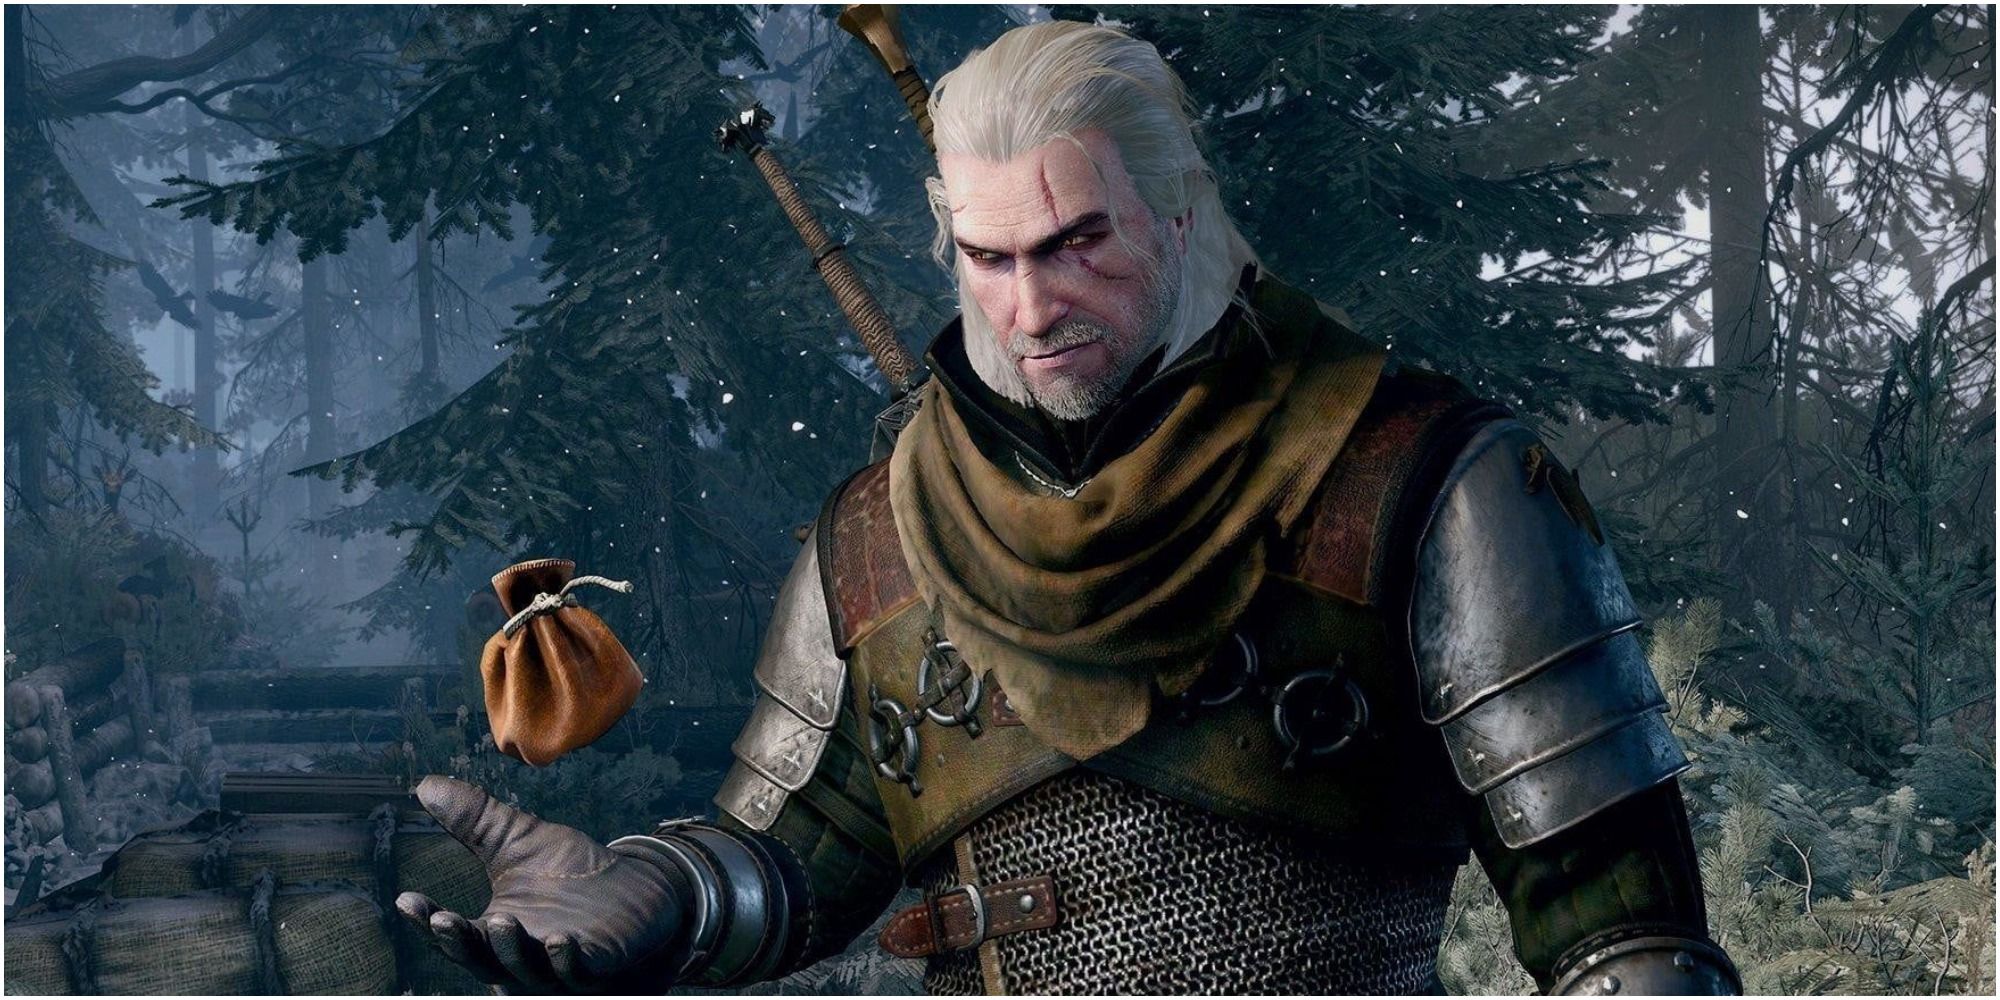 Geralt tossing a coin purse The Witcher 3 Wild Hunt